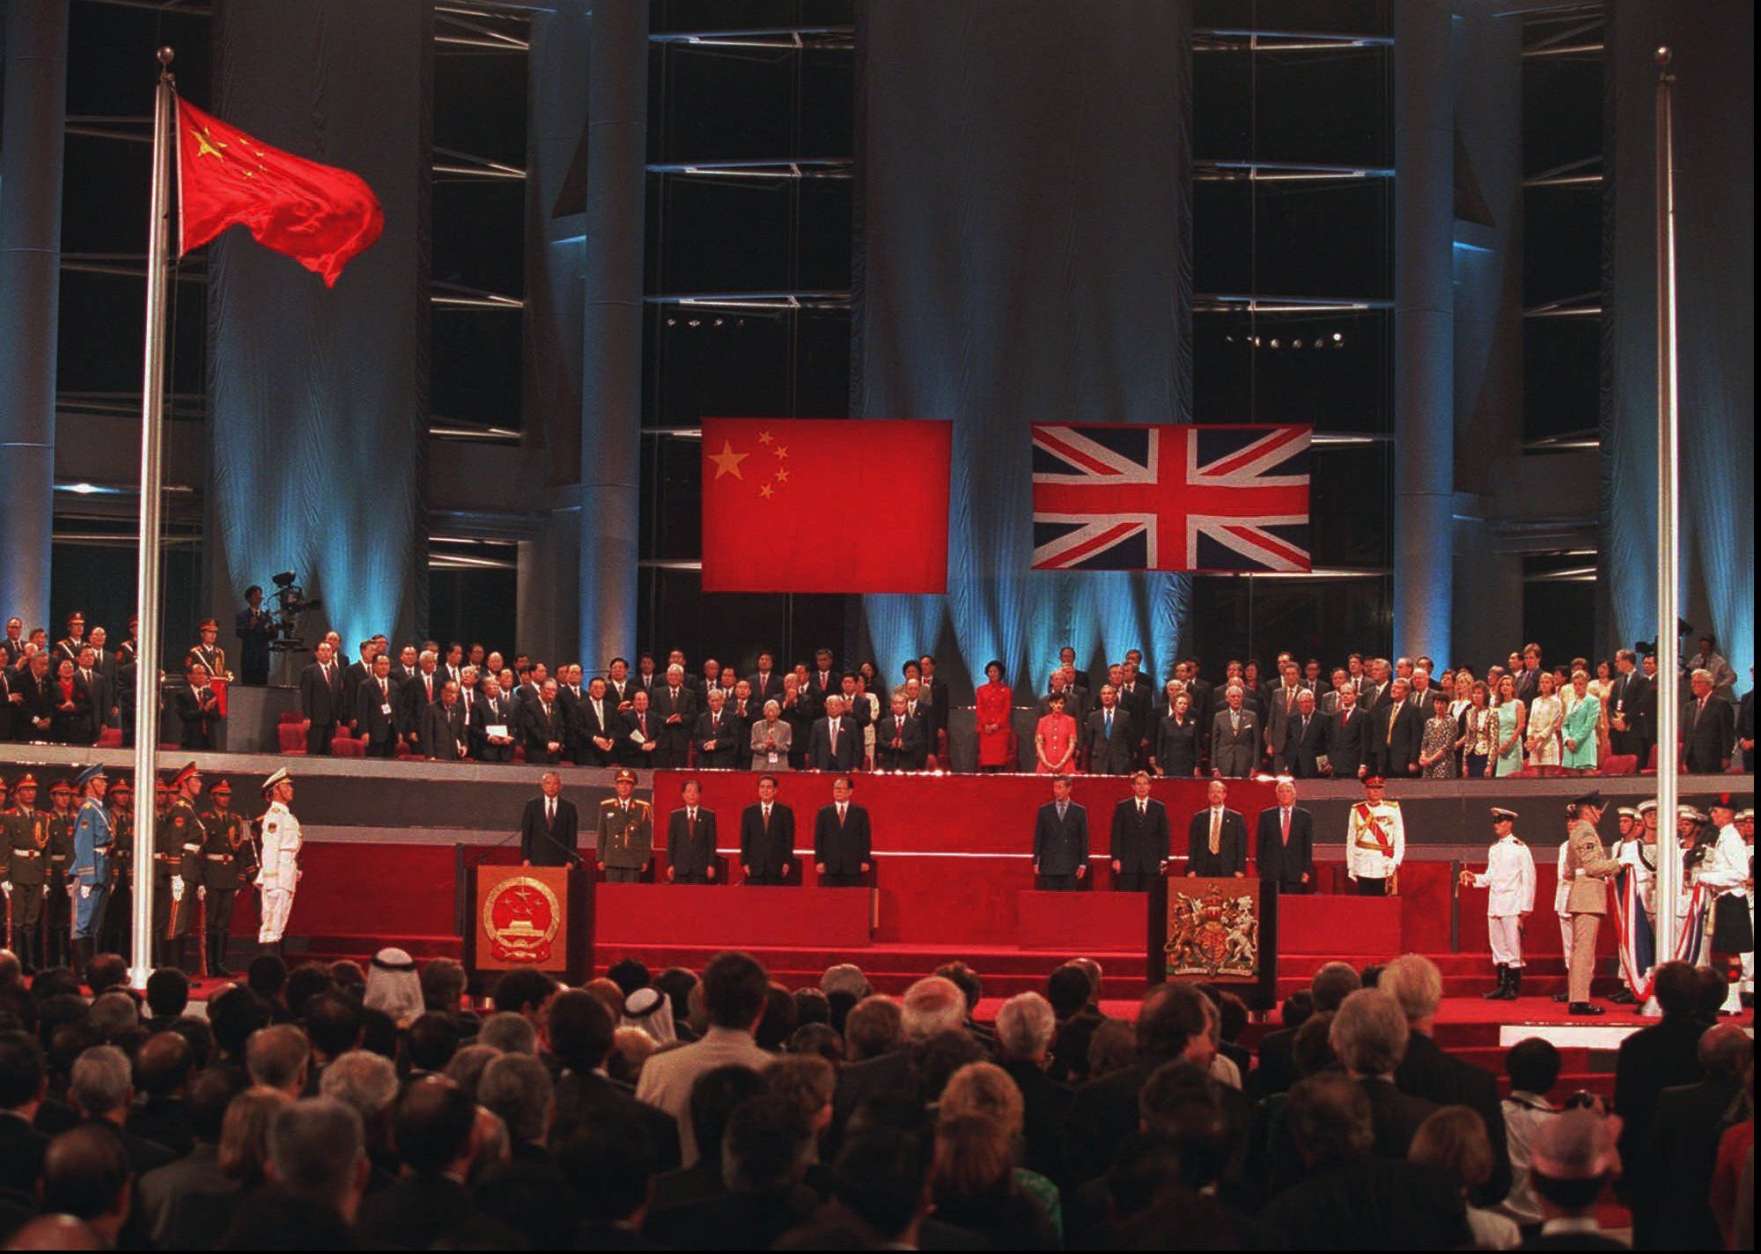 World dignitaries and other guests to the Hong Kong handover ceremony stand and watch the Chinese flag, left, flying after the Union Jack was lowered at the Hong Kong Convention Center Tuesday, July 1, 1997. (AP Photo/Kimimasa Mayama, Pool)